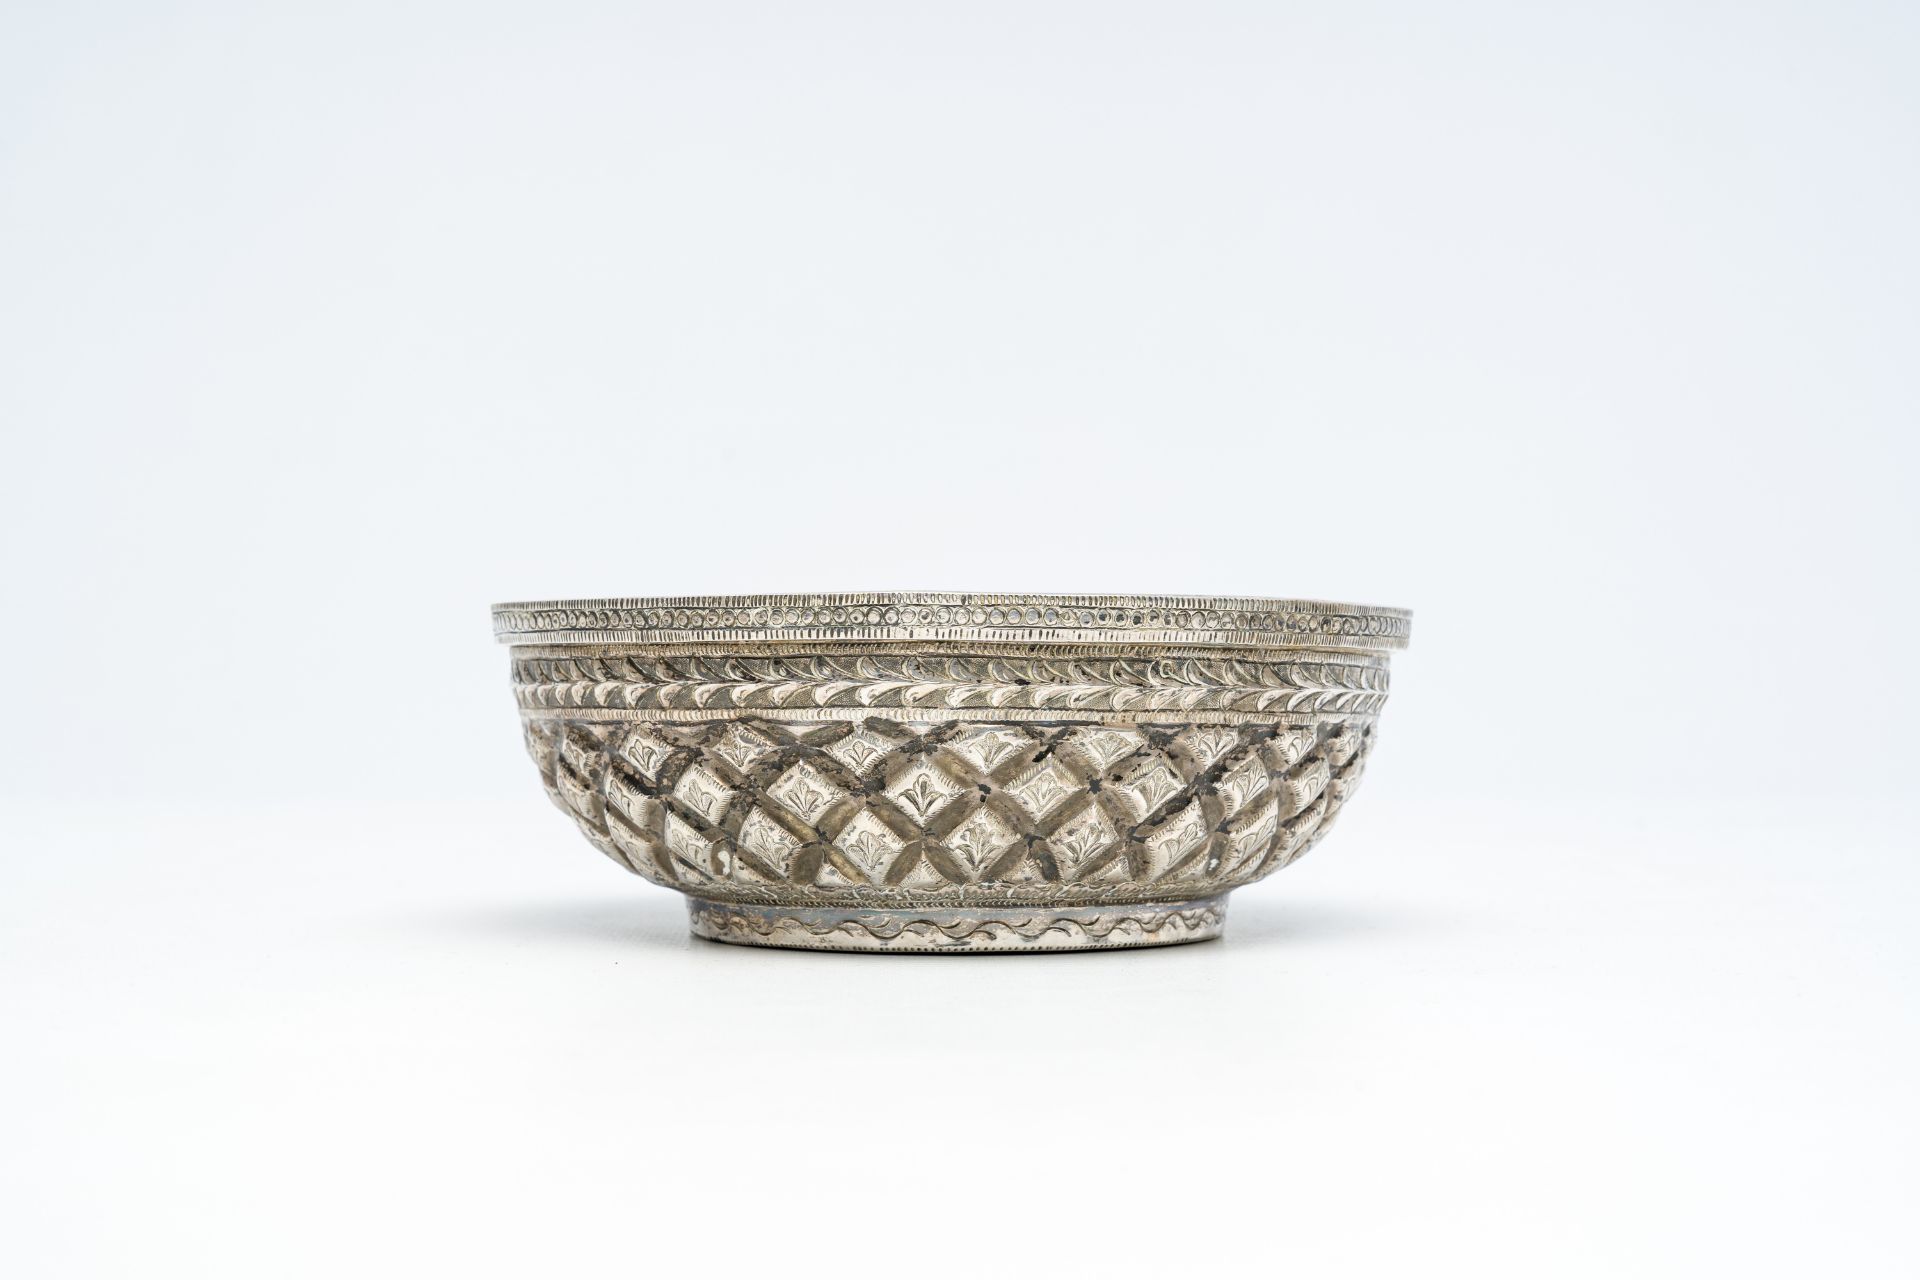 A Southeast Asian silver bowl, probably Laos or Sri Lanka, 19th/20th C. - Image 4 of 7